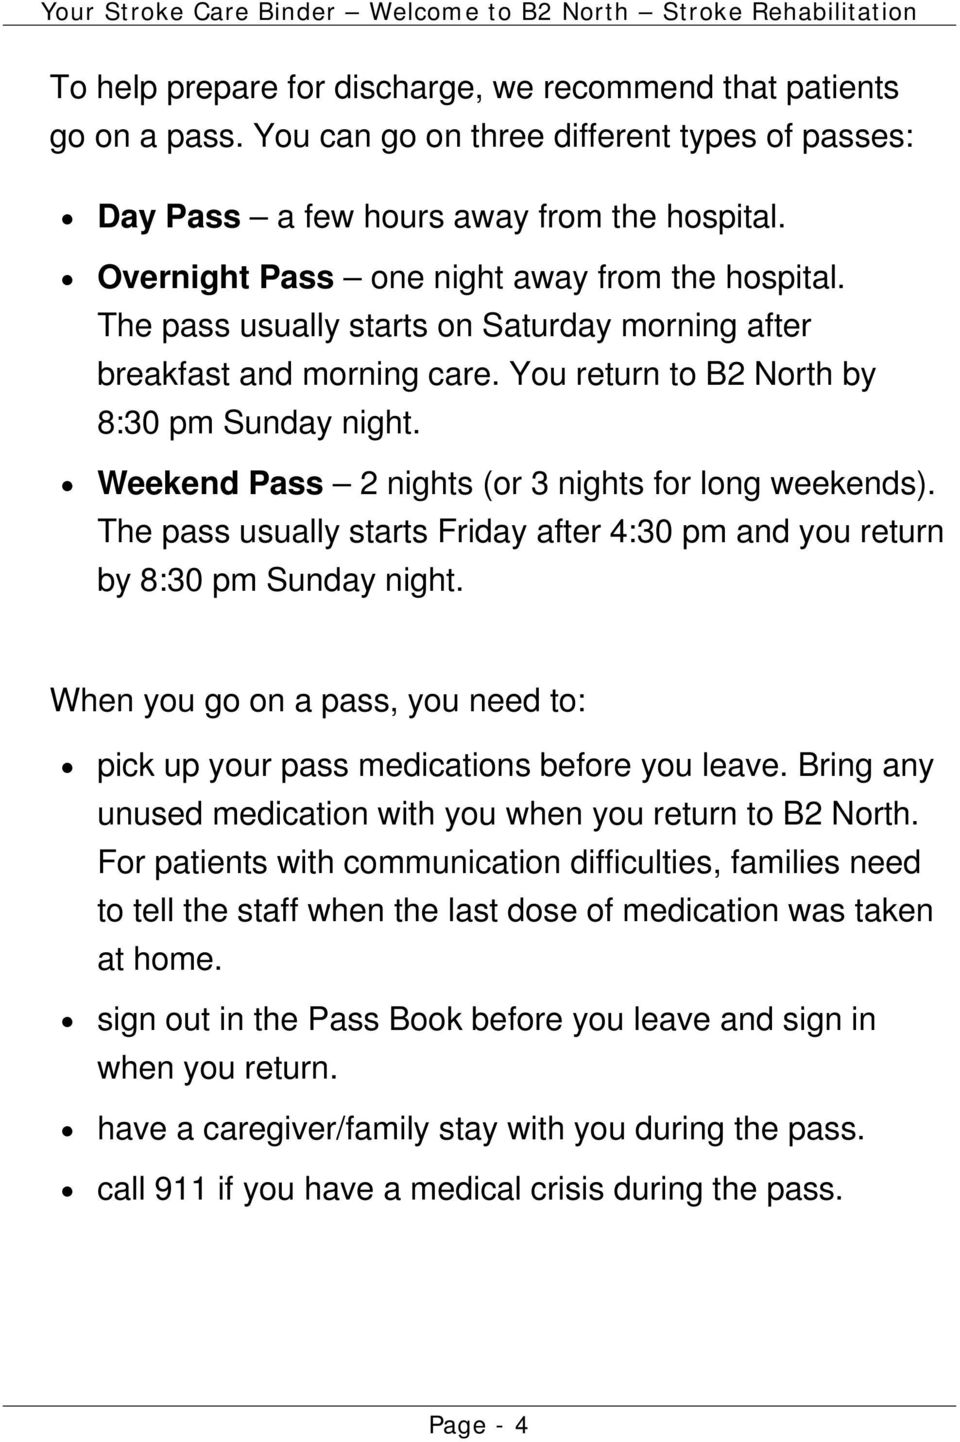 Weekend Pass 2 nights (or 3 nights for long weekends). The pass usually starts Friday after 4:30 pm and you return by 8:30 pm Sunday night.